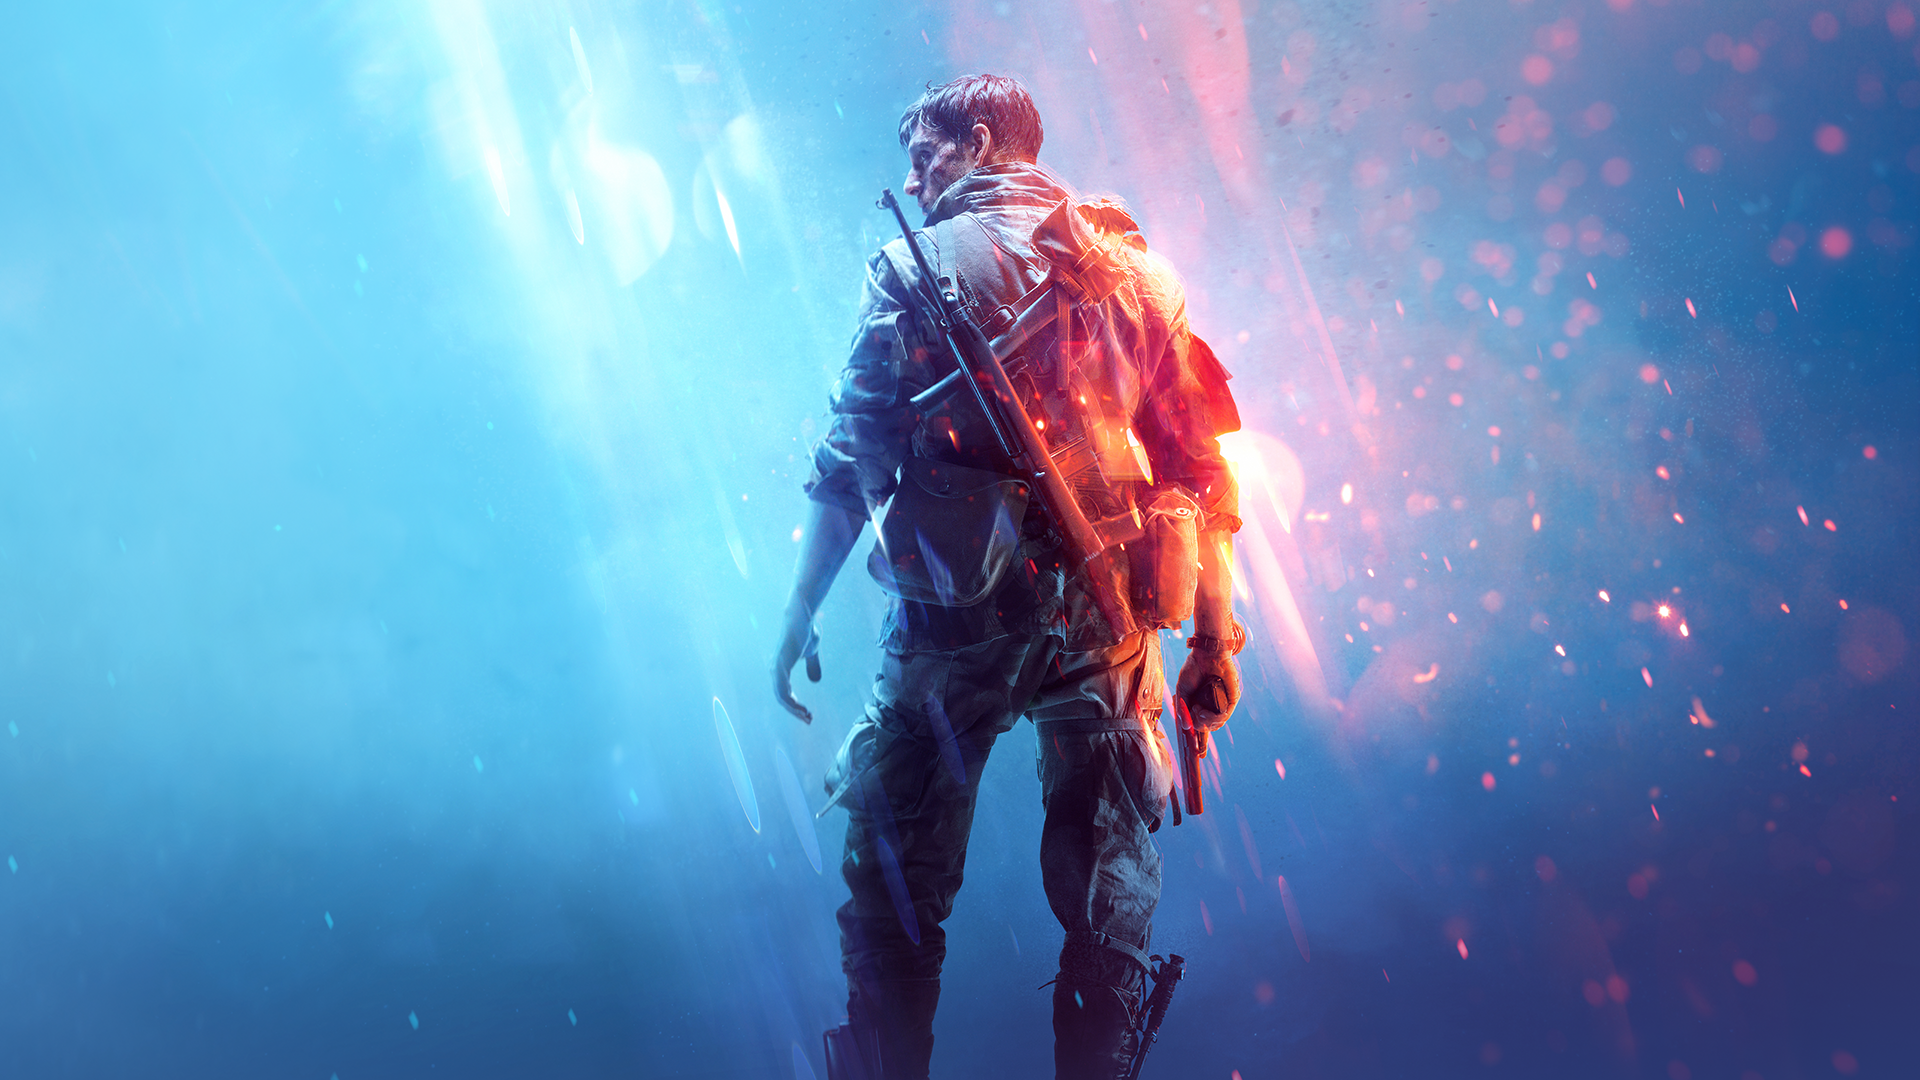 240+ Battlefield V HD Wallpapers and Backgrounds